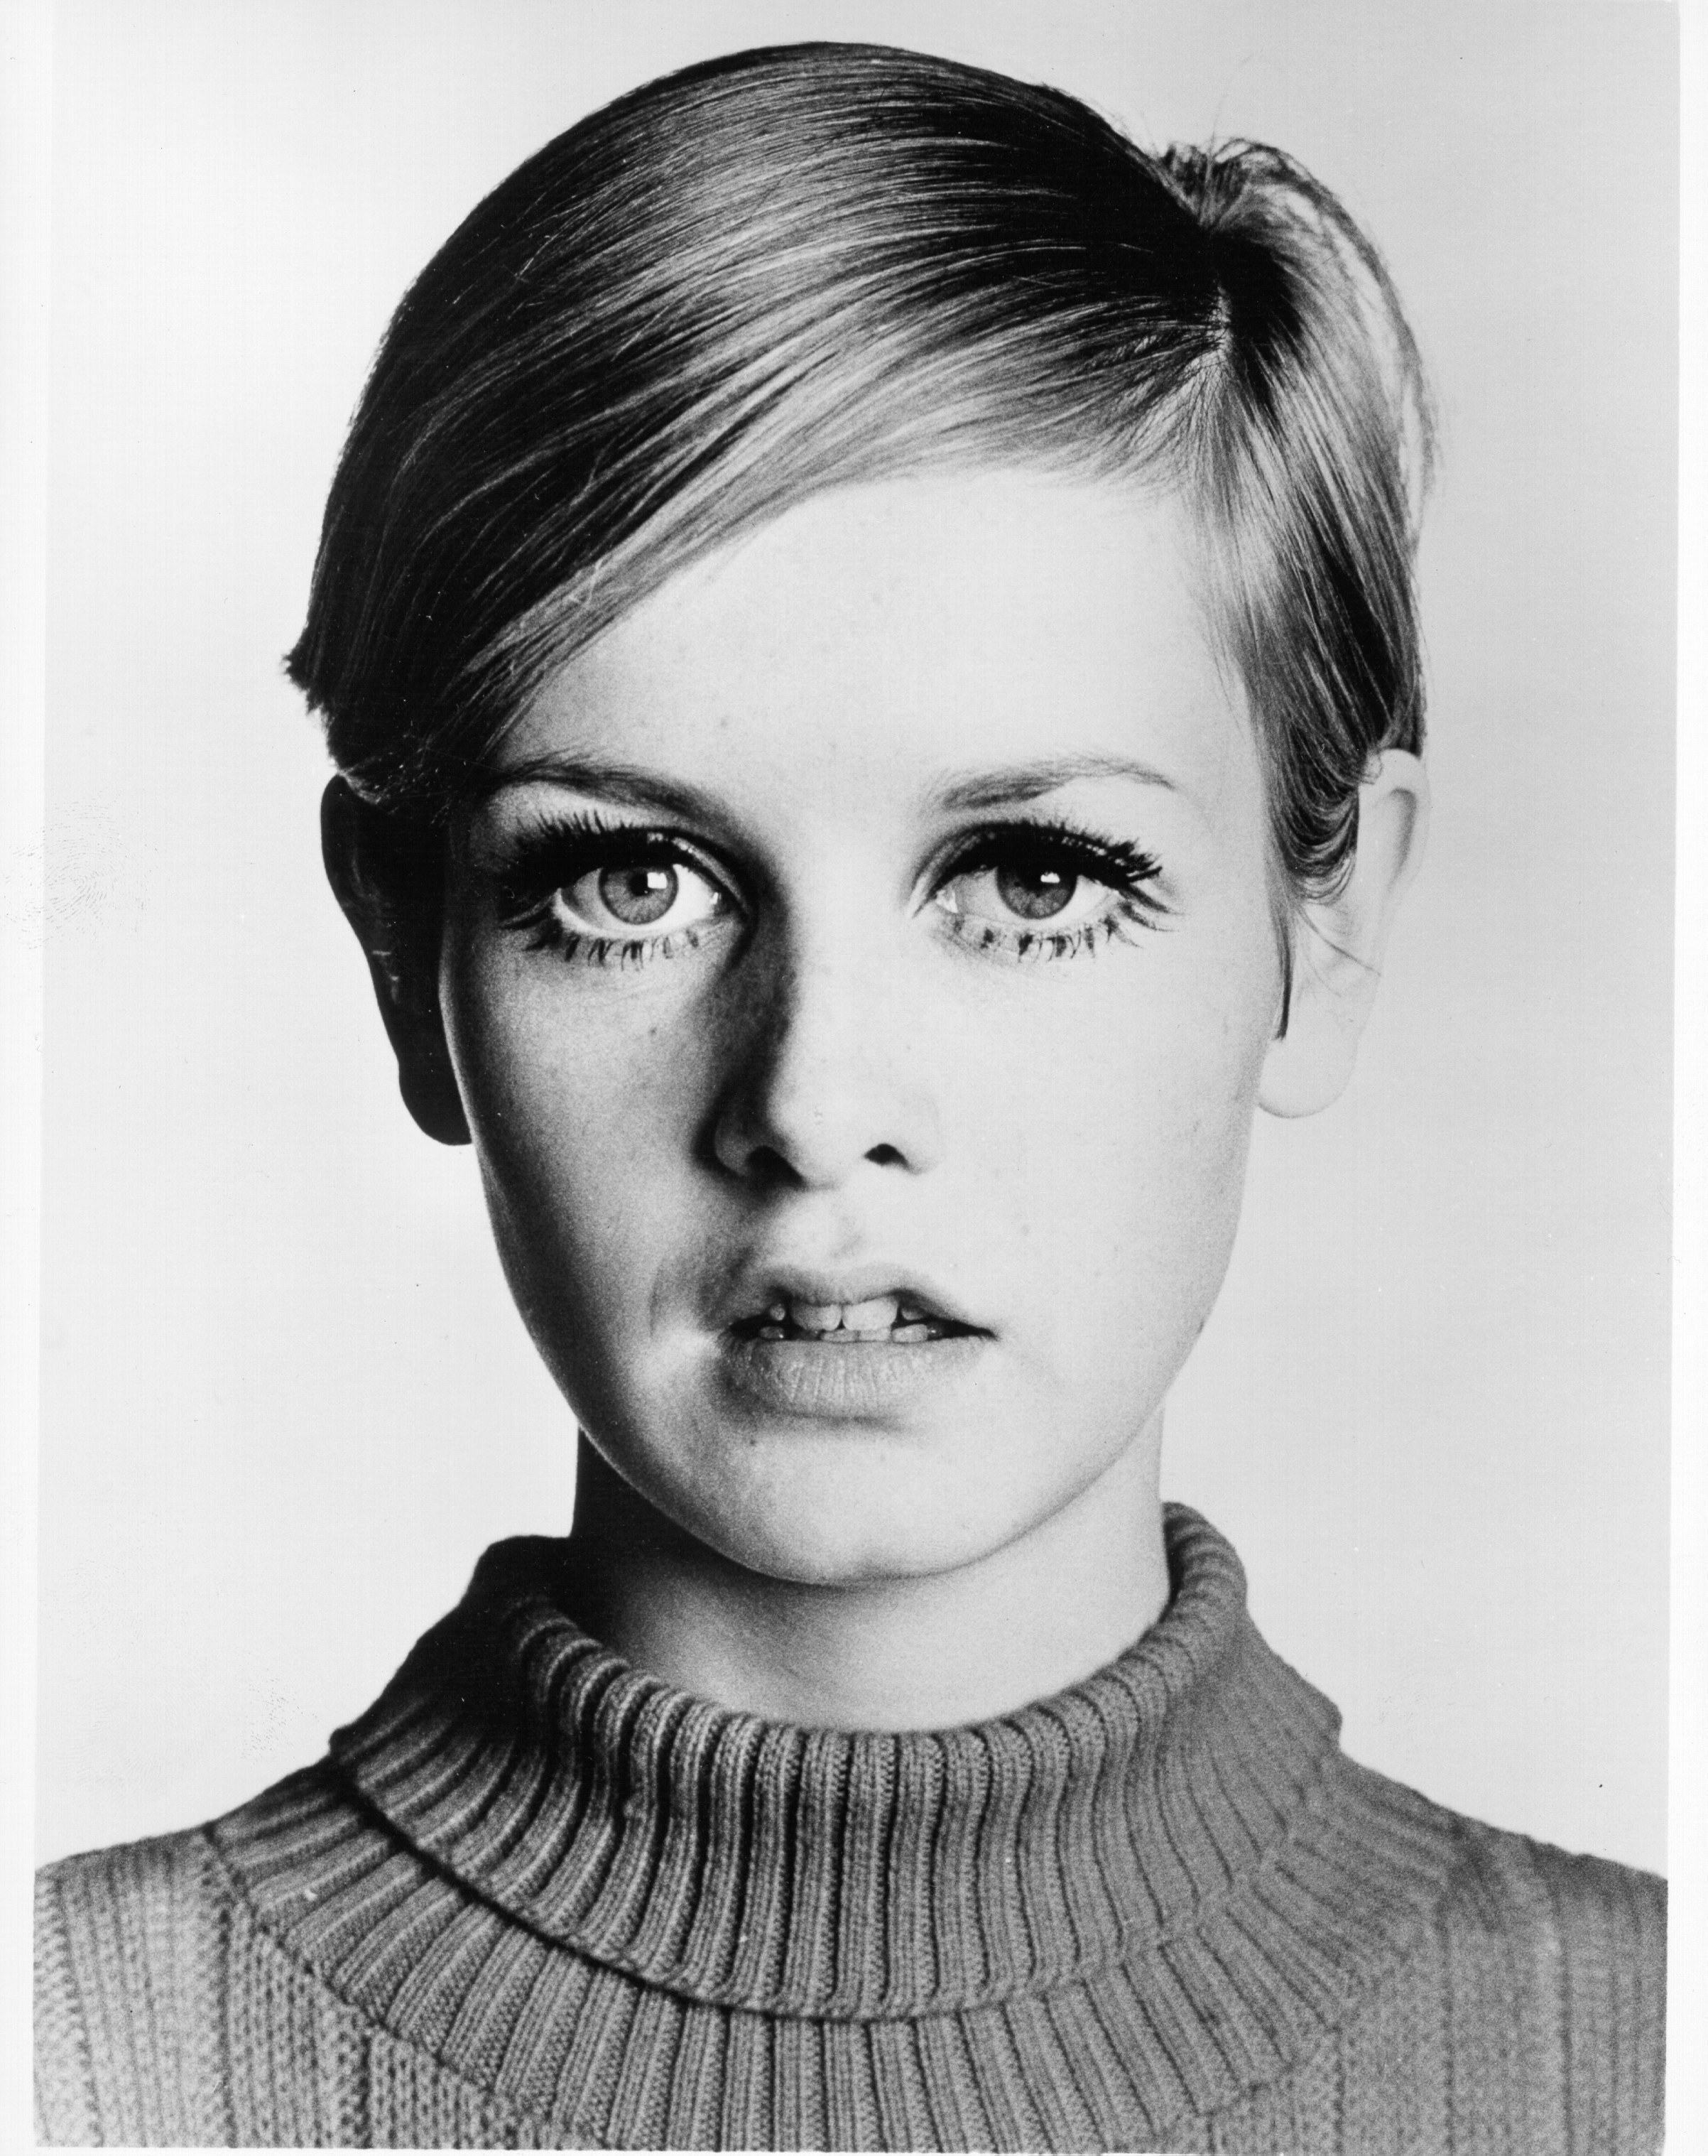 Black and white portrait of model Twiggy